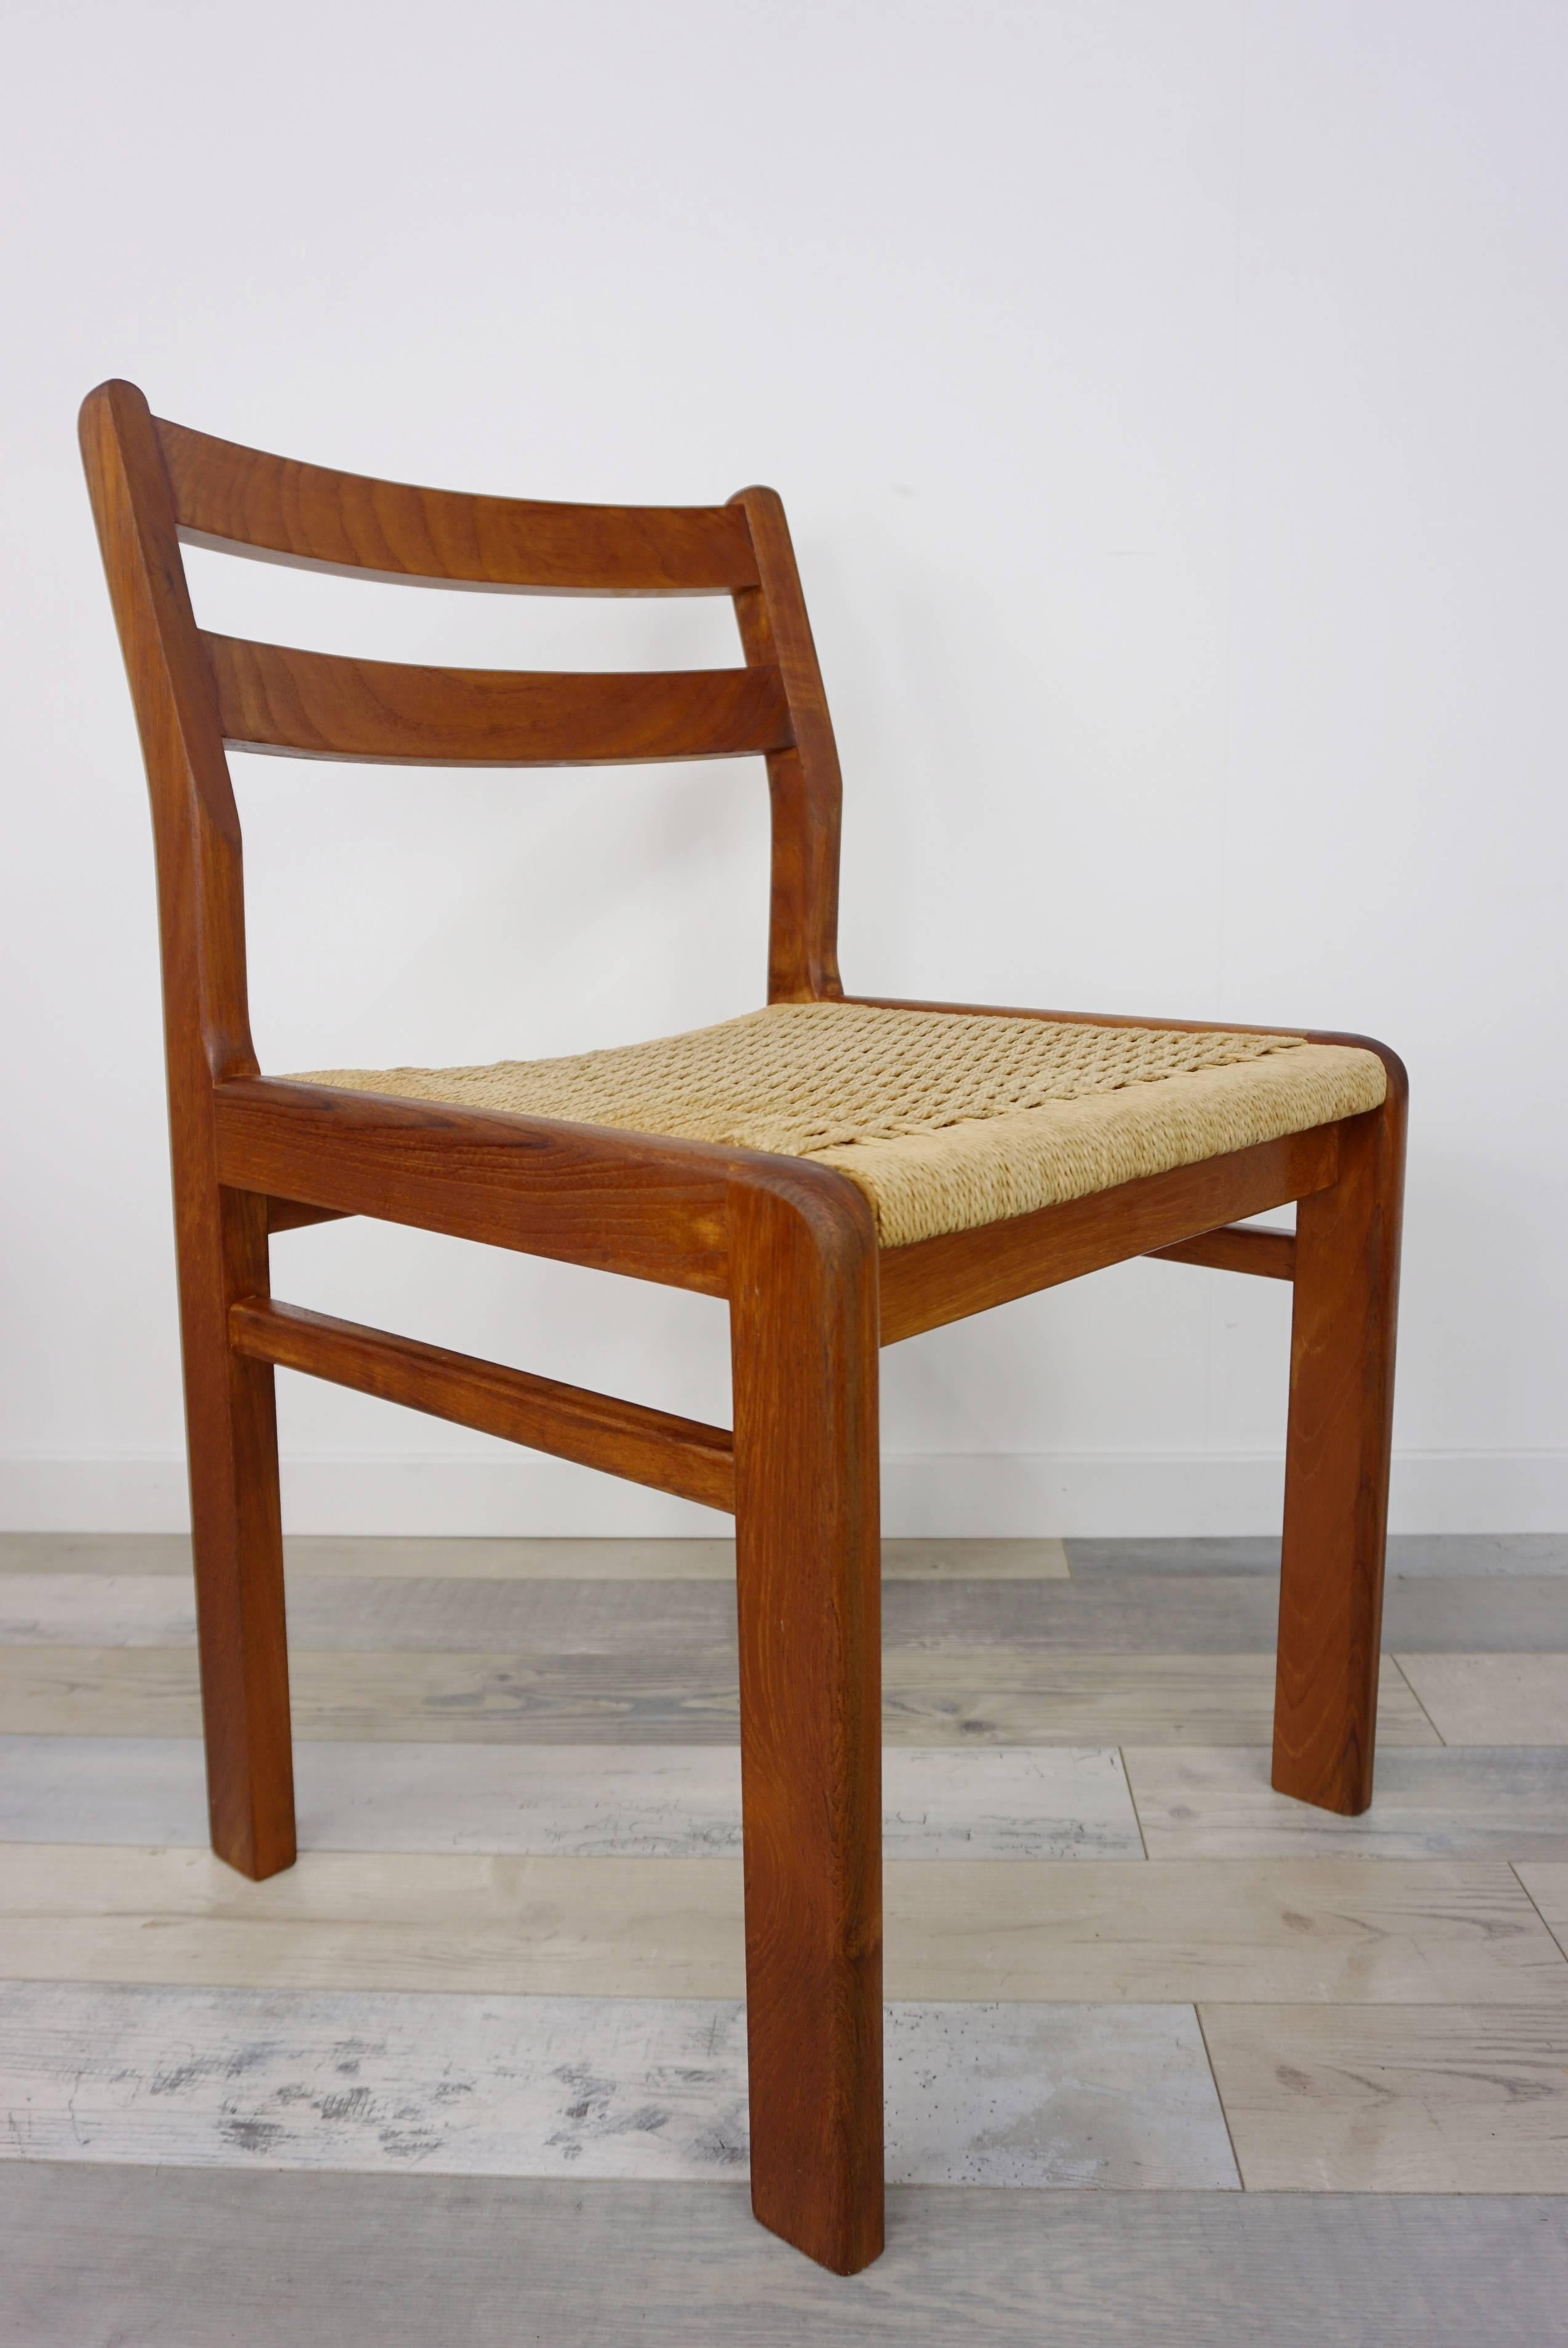 Set of four Danish 1960s design chairs with teak structure and woven rope seat, subtle work at the manner of Jorgen Henrik Moller for J.L Moller Furniture.